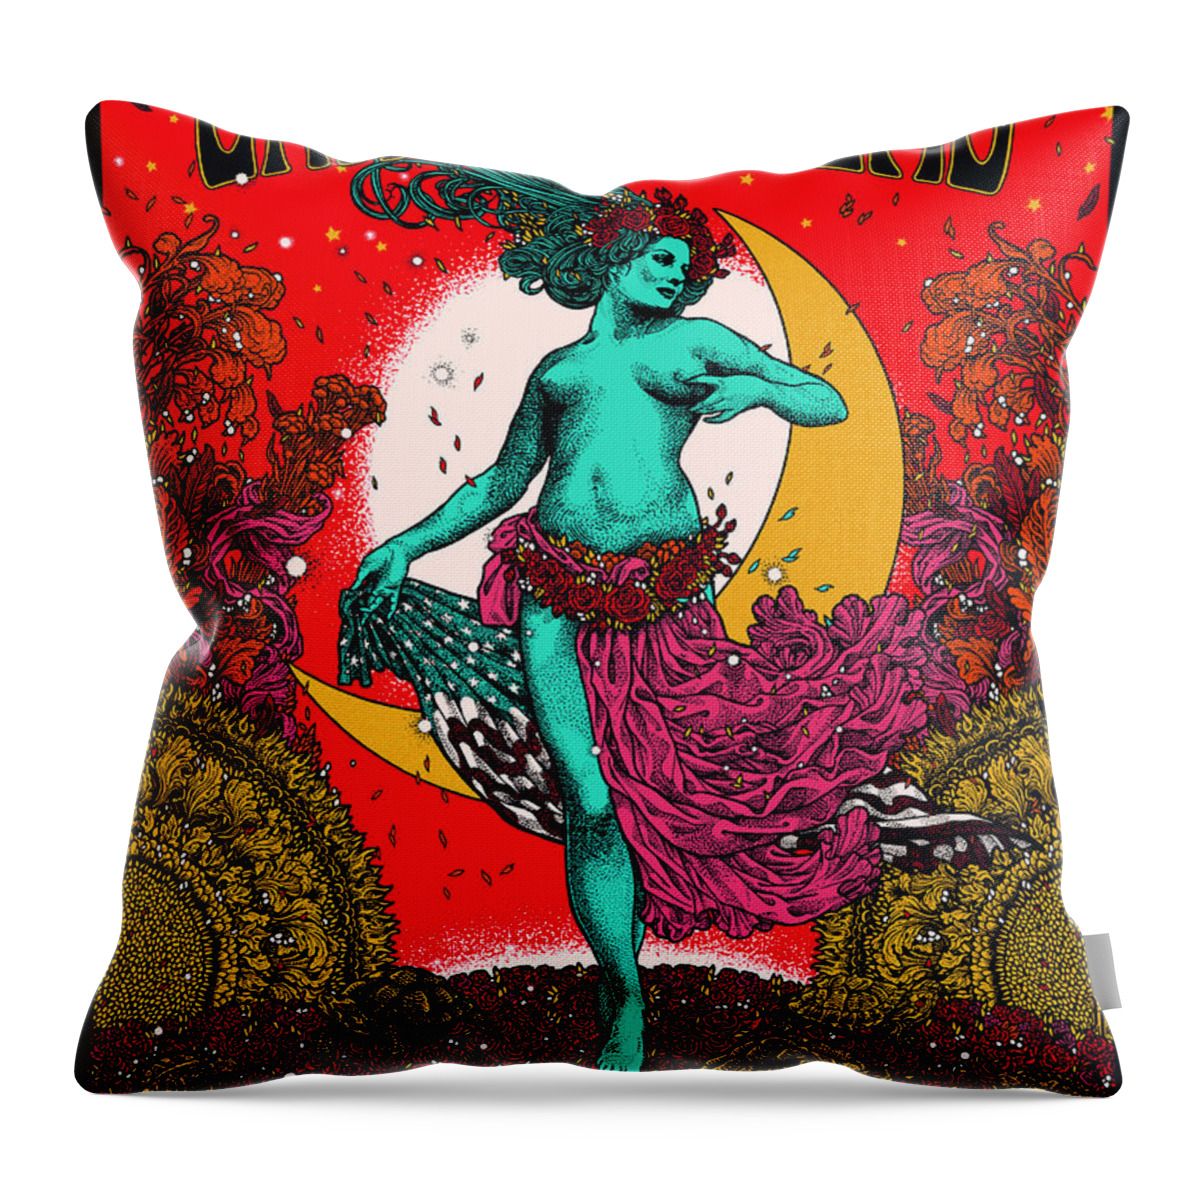 Grateful Dead Throw Pillow featuring the photograph Grateful Dead Rock Poster by Action